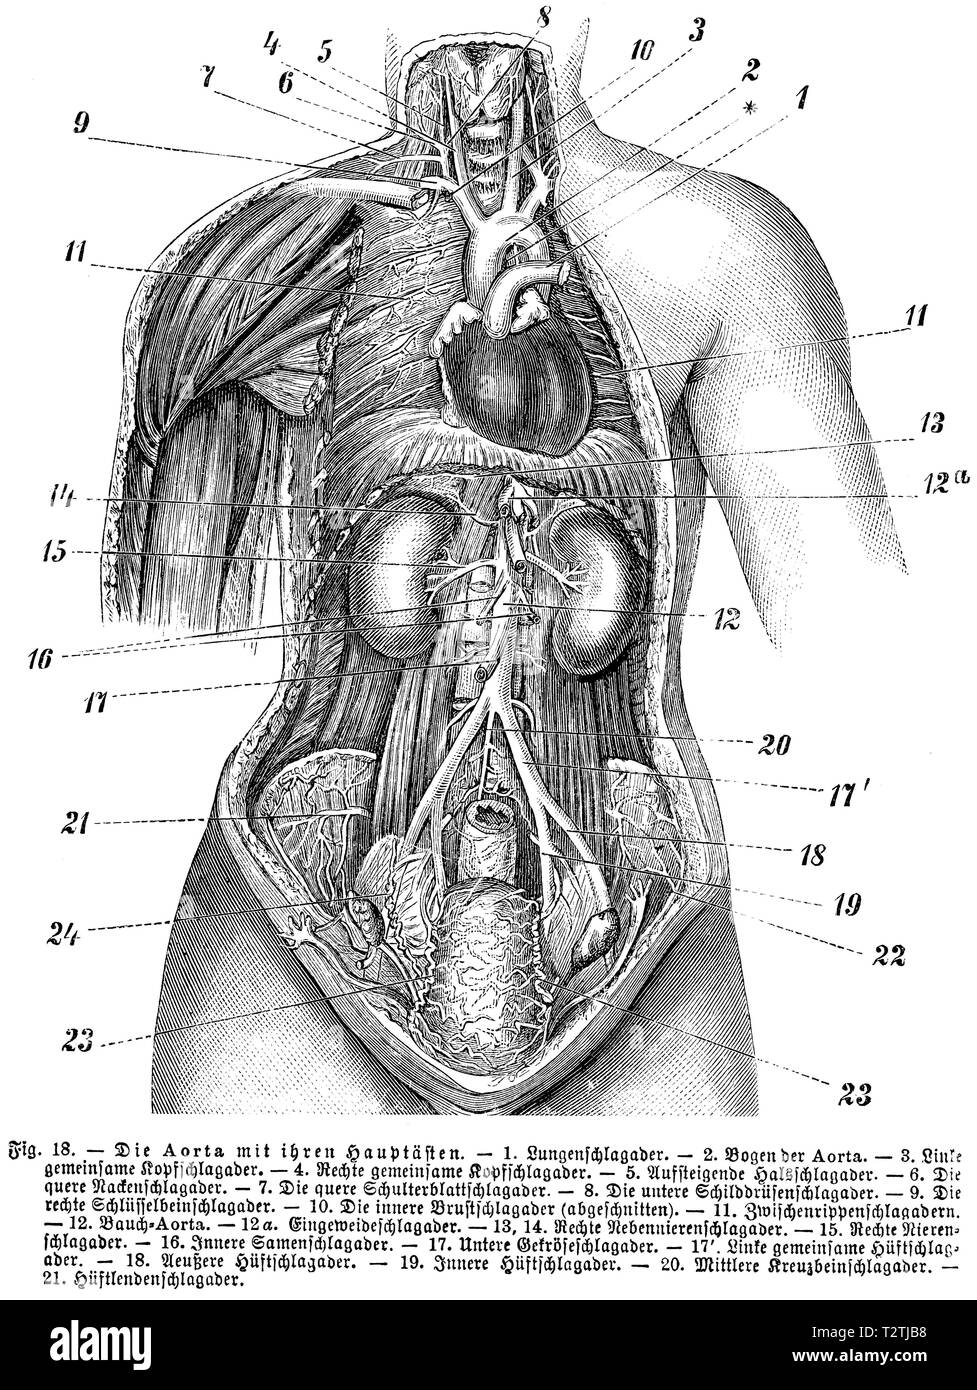 Human: aorta with its main branches, 1) pulmonary artery, 2) arch of aorta, 3) left common carotid artery, 4) right common carotid artery, 5) ascending carotid artery, 6) transverse carotid artery, 7) transverse scapula, 8) lower thyroid artery, 9 ) Right coronary artery, 10) Internal thoracic aorta (truncated), 11) Intercostal veins, 12) Abdominal aorta, 12 a) Intestinal staph, 13, 14) Right adrenal artery, 15) Right renal artery, 16) Internal seminal vein, 17) Lower mesentery artery, 17 ') Left common hip artery, 18) Outer hip artery, 19) Internal hip artery, 20) Mid-sacral artery, 21) Hip a Stock Photo